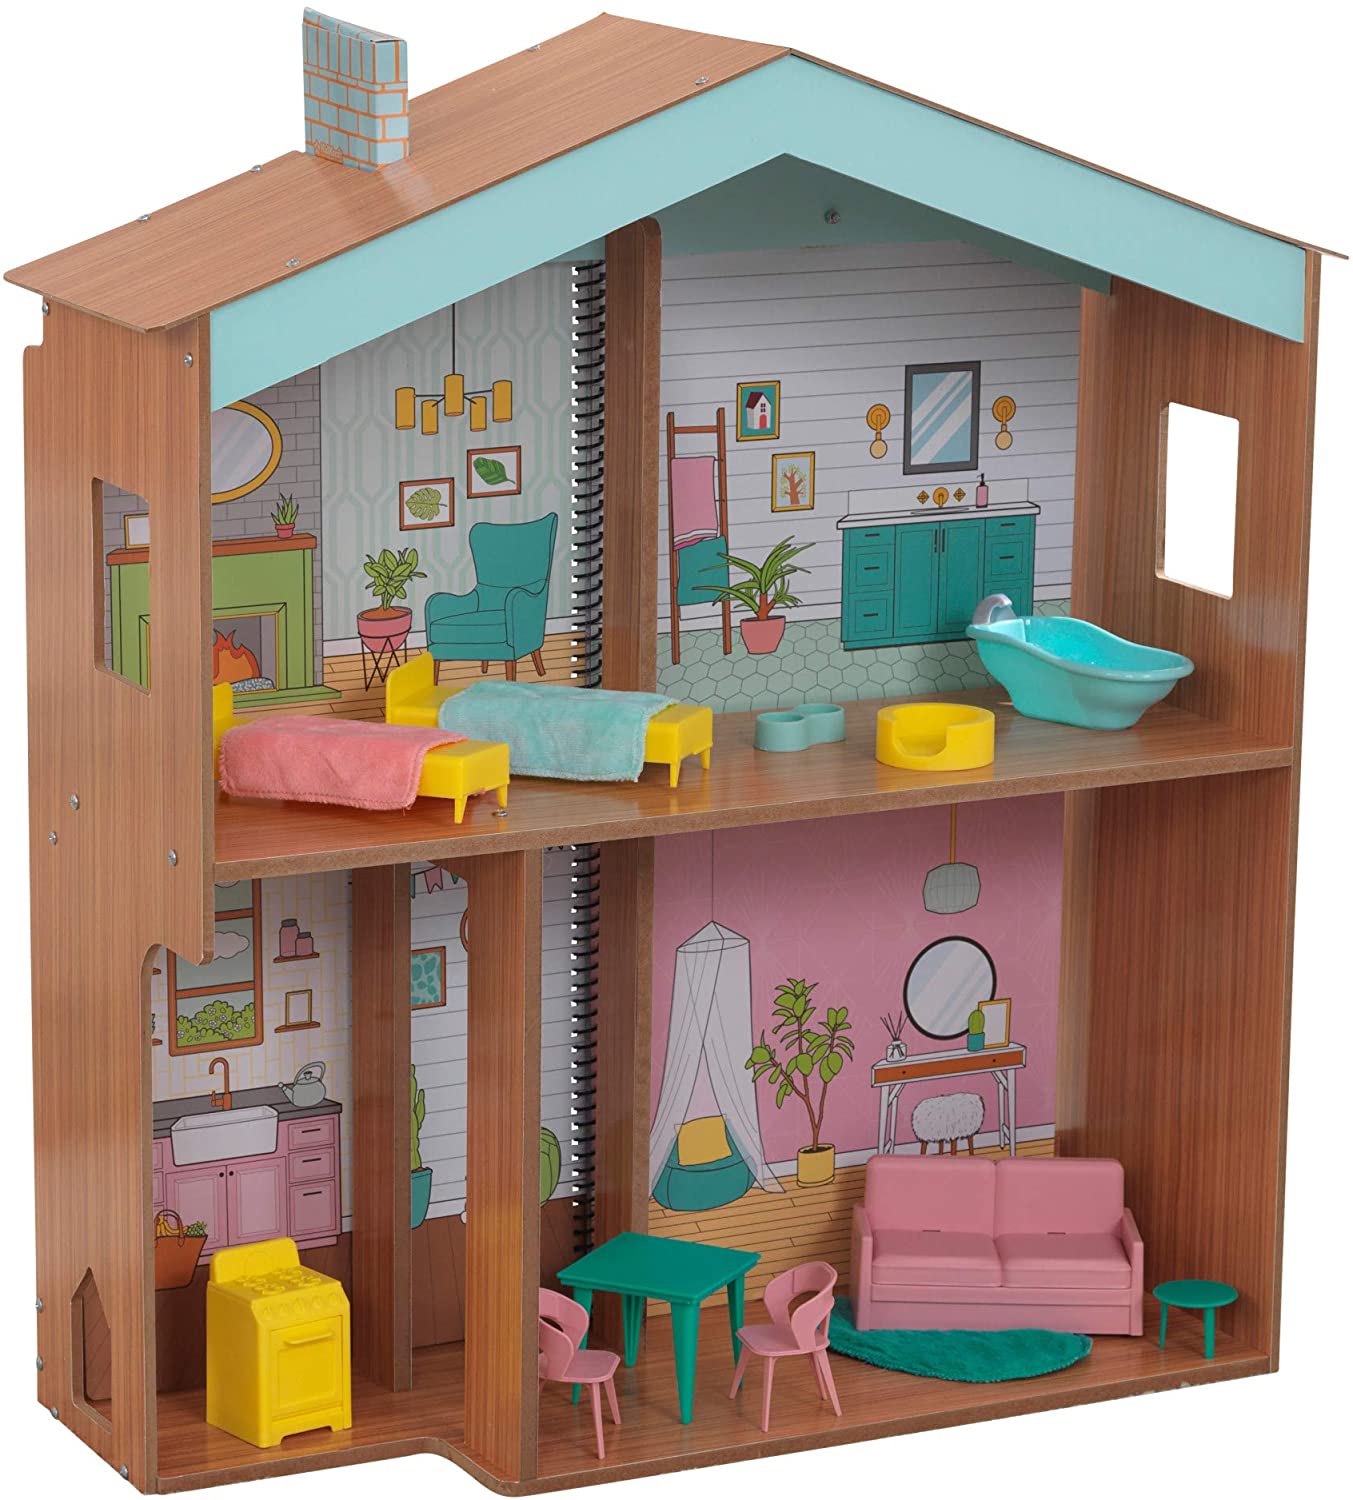 KidKraft Designed by Me Color Decor Wooden Dollhouse w/ 20 Accessories $18.71 + Free Shipping w/ Prime or on $25+